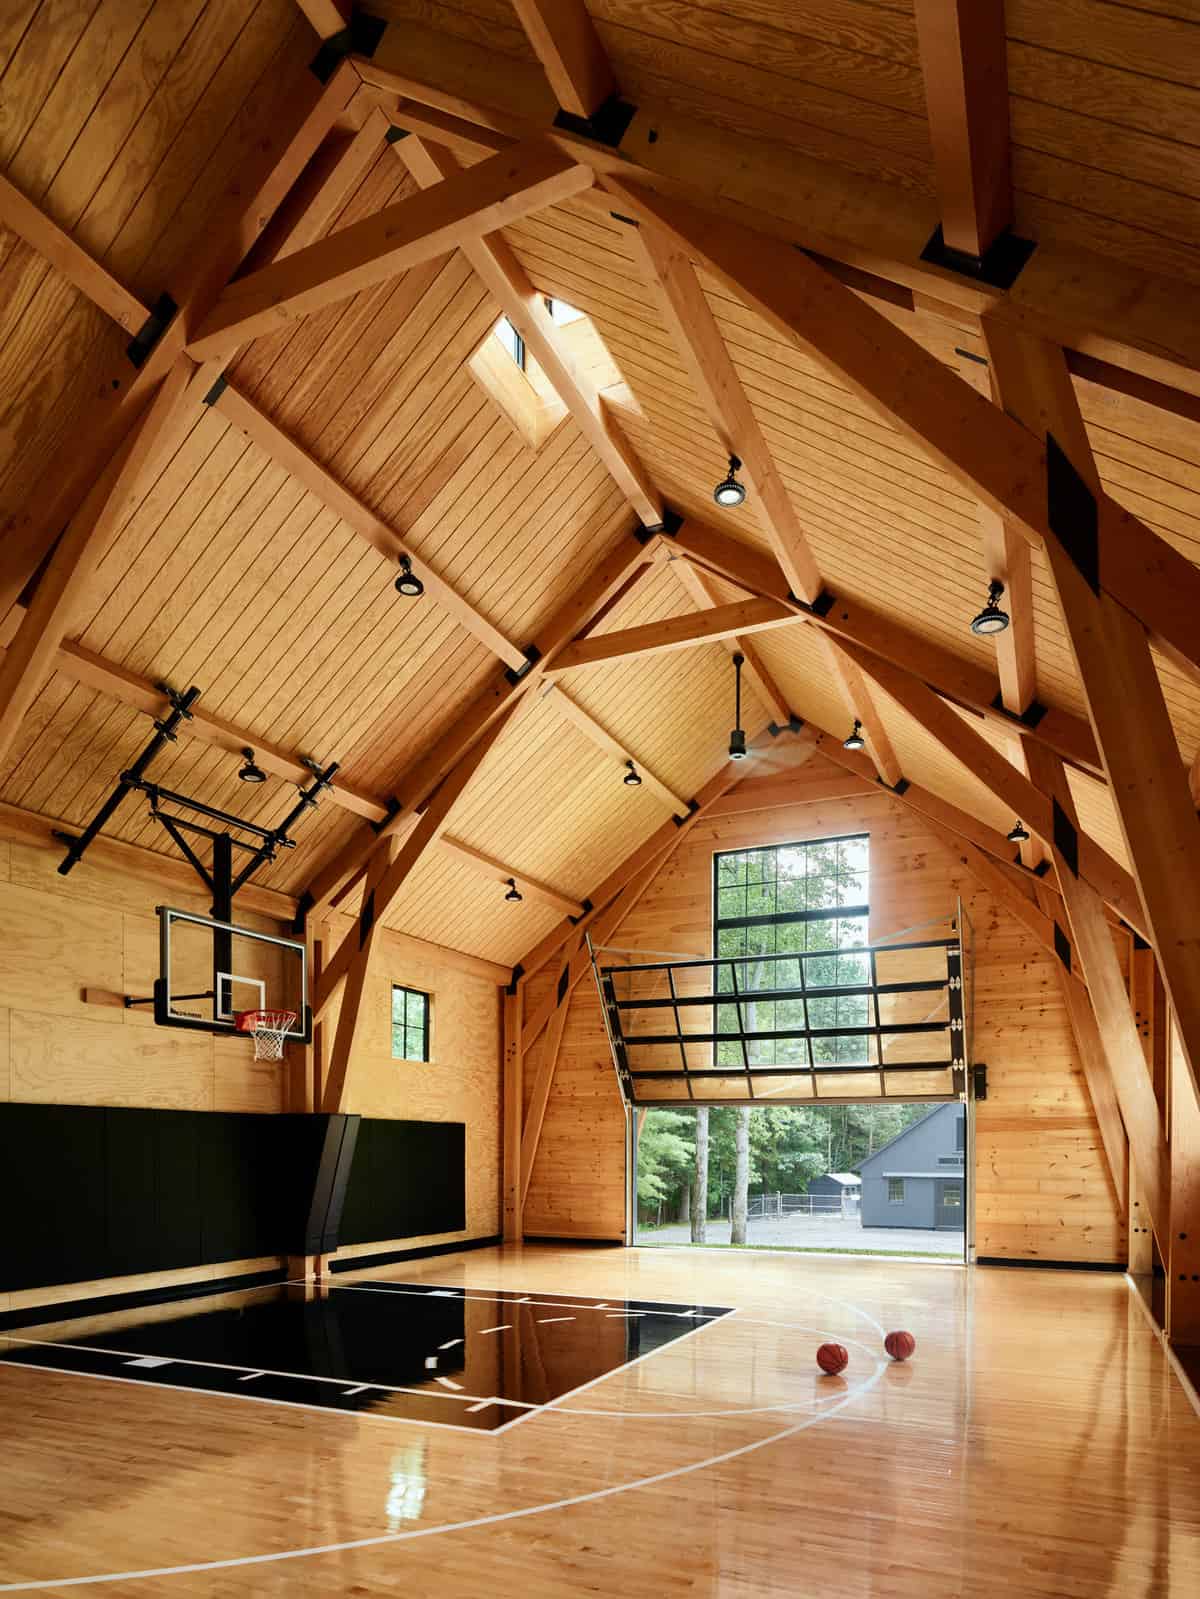 The structural Douglas Fir timber frame is economical in design. While the frame supports a volume of space large enough to shoot a basketball from any angle, it uses smaller dimensioned timber sizes in a carefully thought-out design  that makes efficient use of the timber to structurally support such a large space.